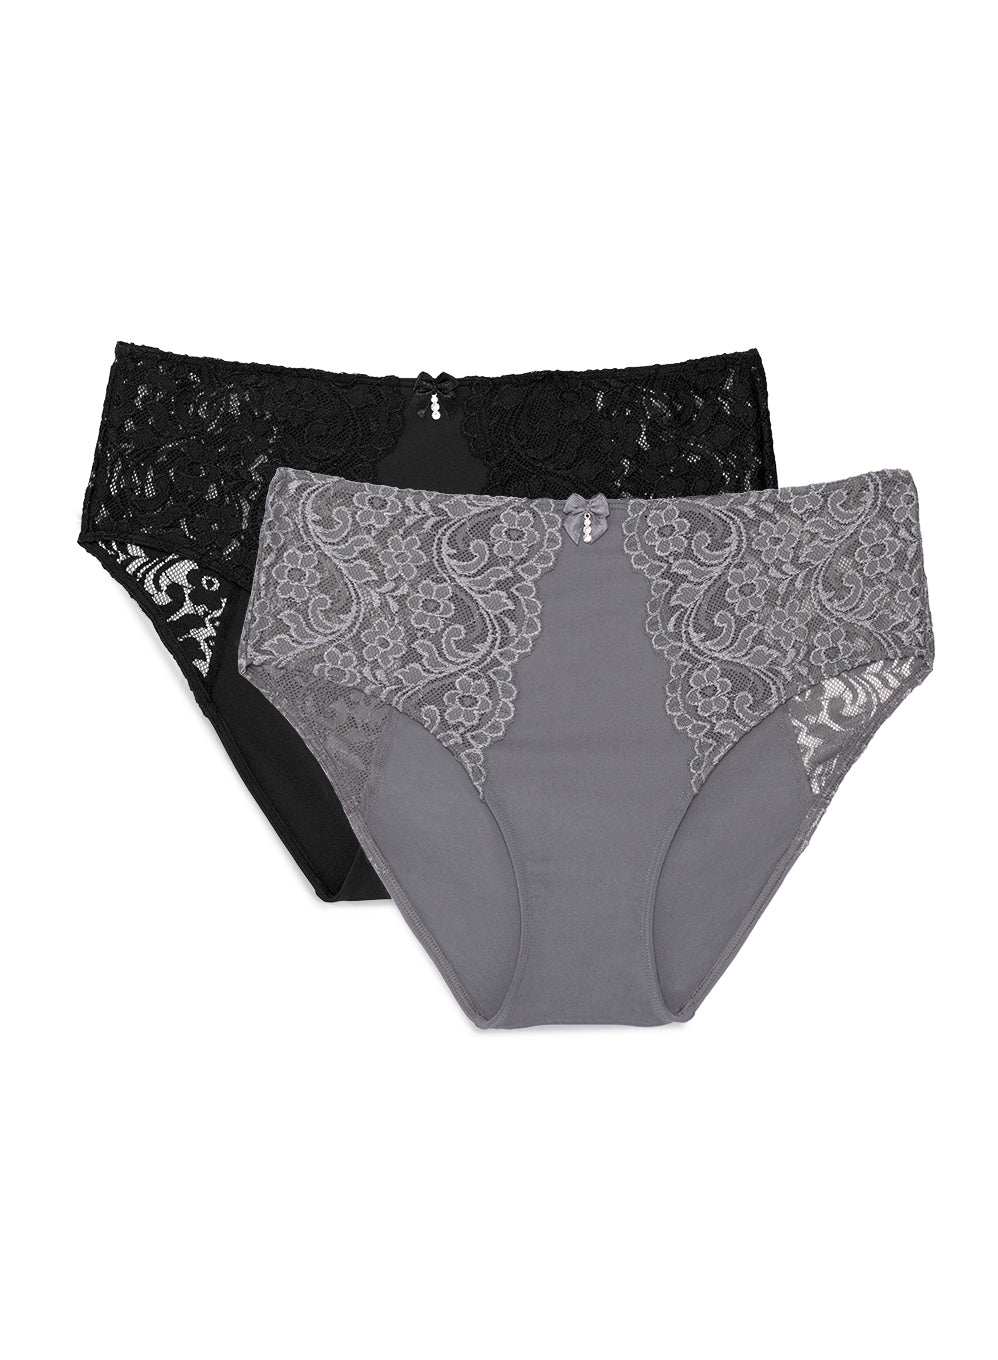  Smart & Sexy Women's Signature Lace Thong Panty 2 Pack